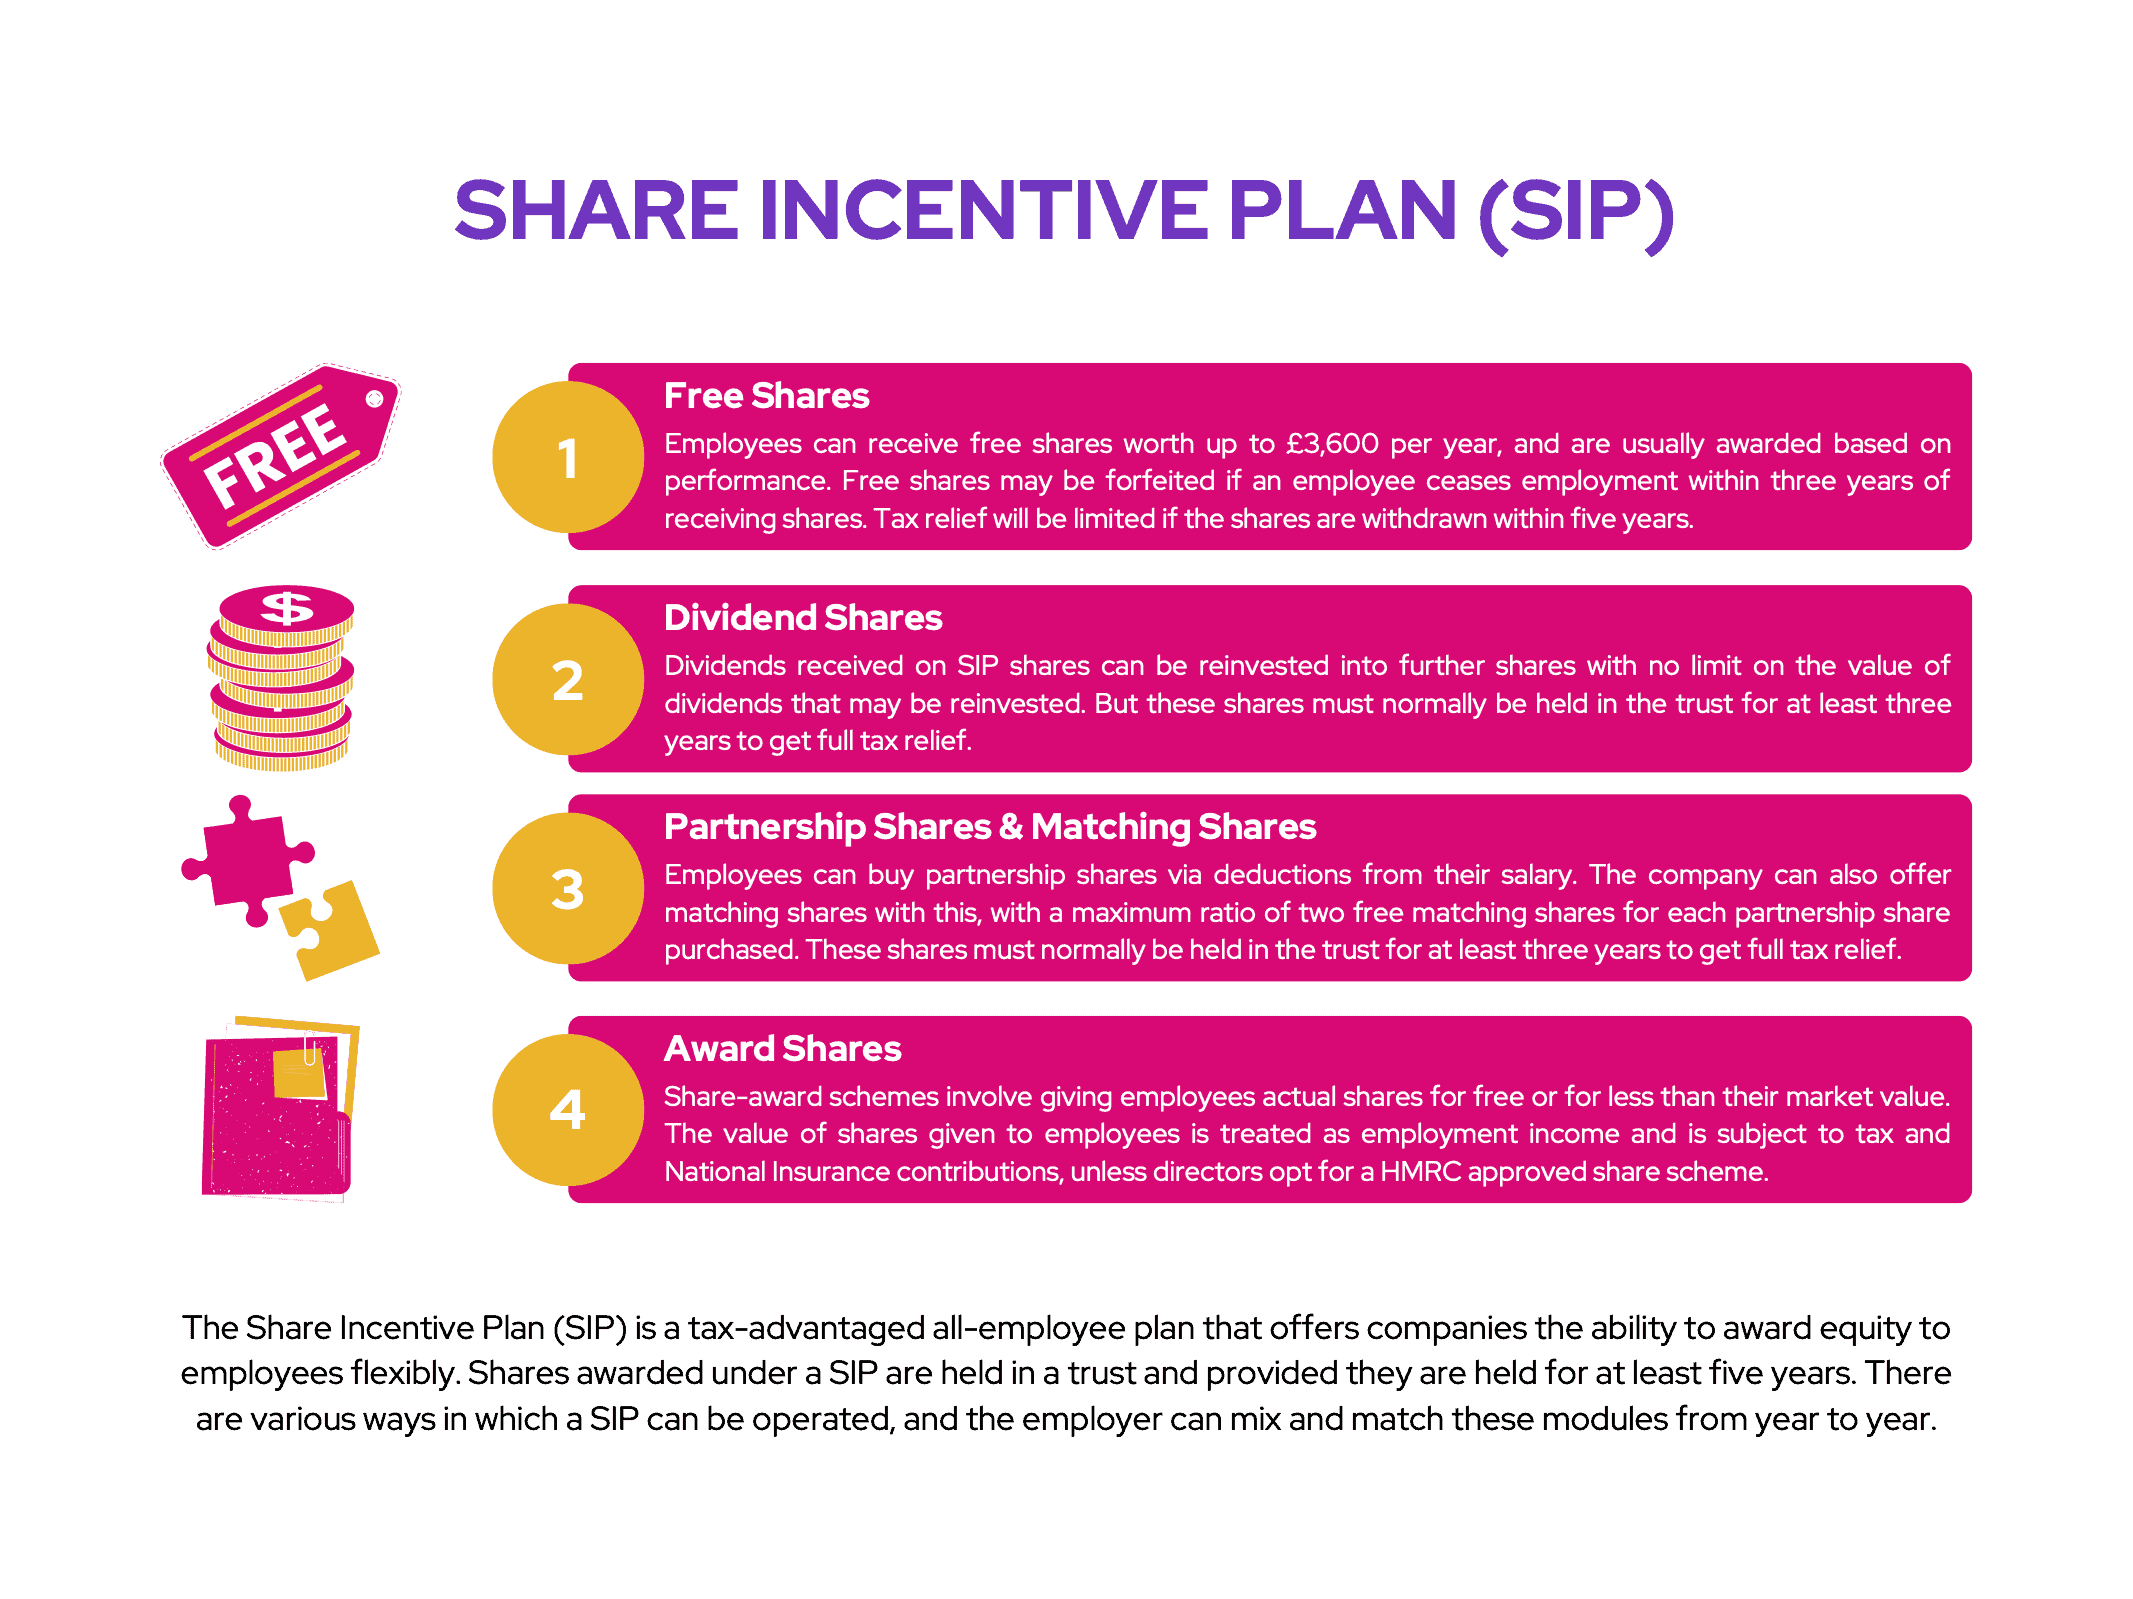 Director Dealings: Share Incentive Plan (SIP)